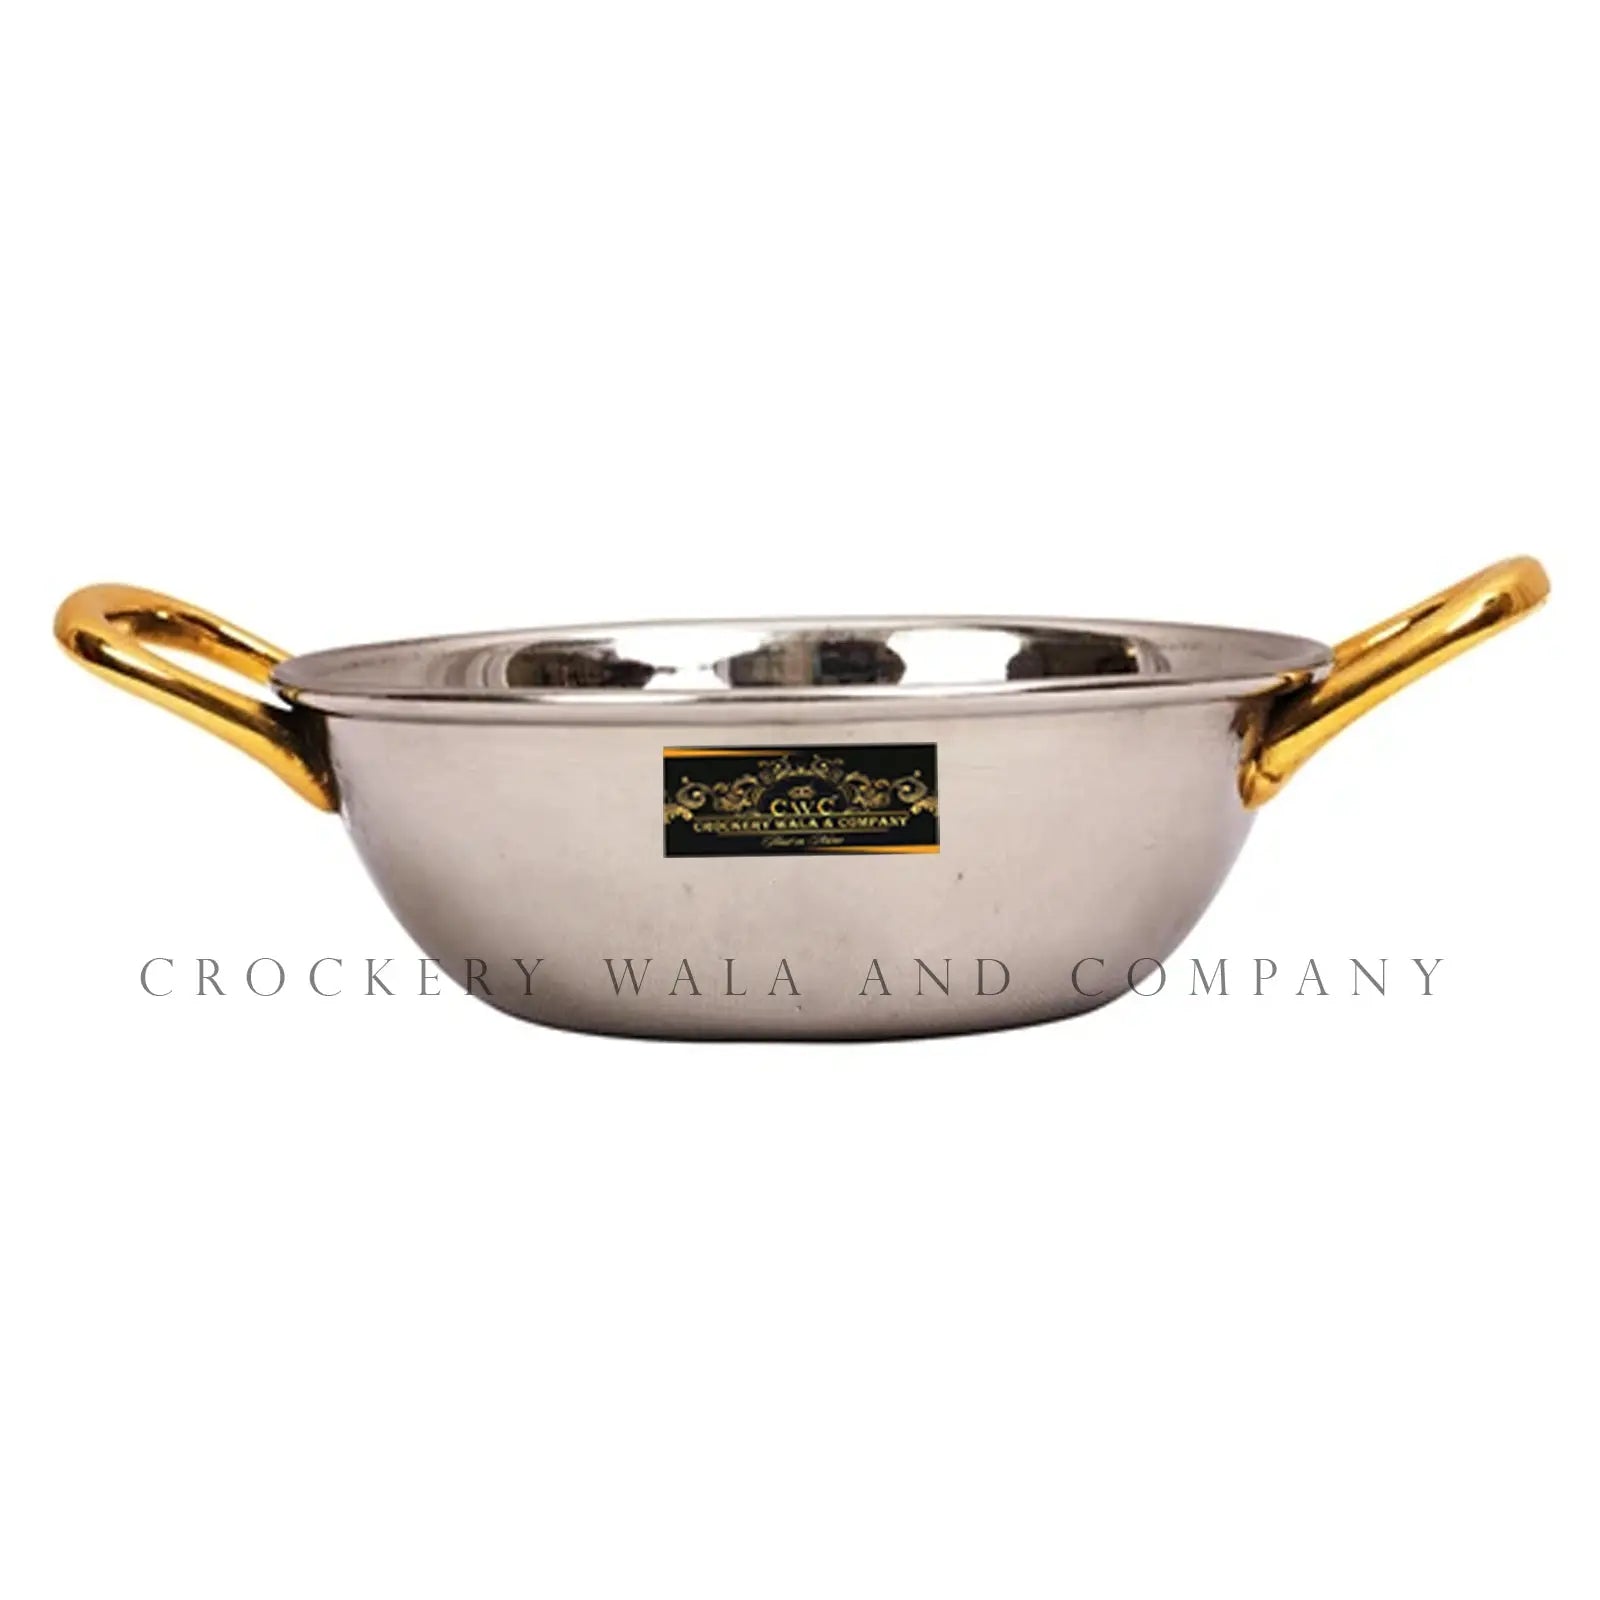 Crockery Wala And Company Stainless Steel Kadhai Bowl With Brass Handles For Serving Gravy, Curries 400 ML - CROCKERY WALA AND COMPANY 